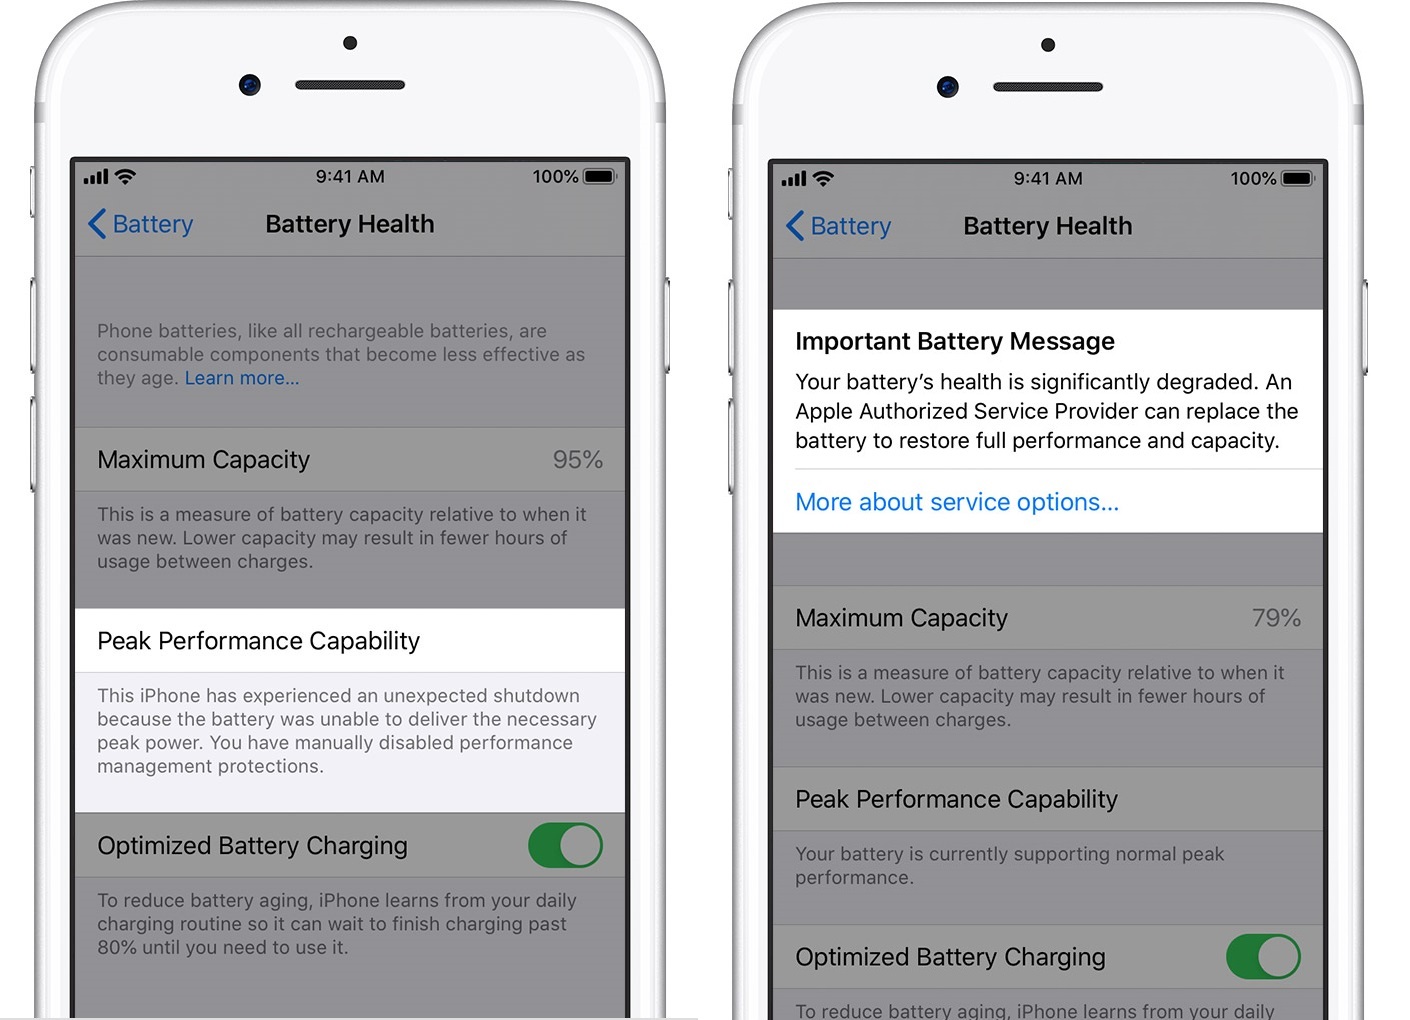 Apple iPhone battery health menus: Performance management turned off and Battery health degraded